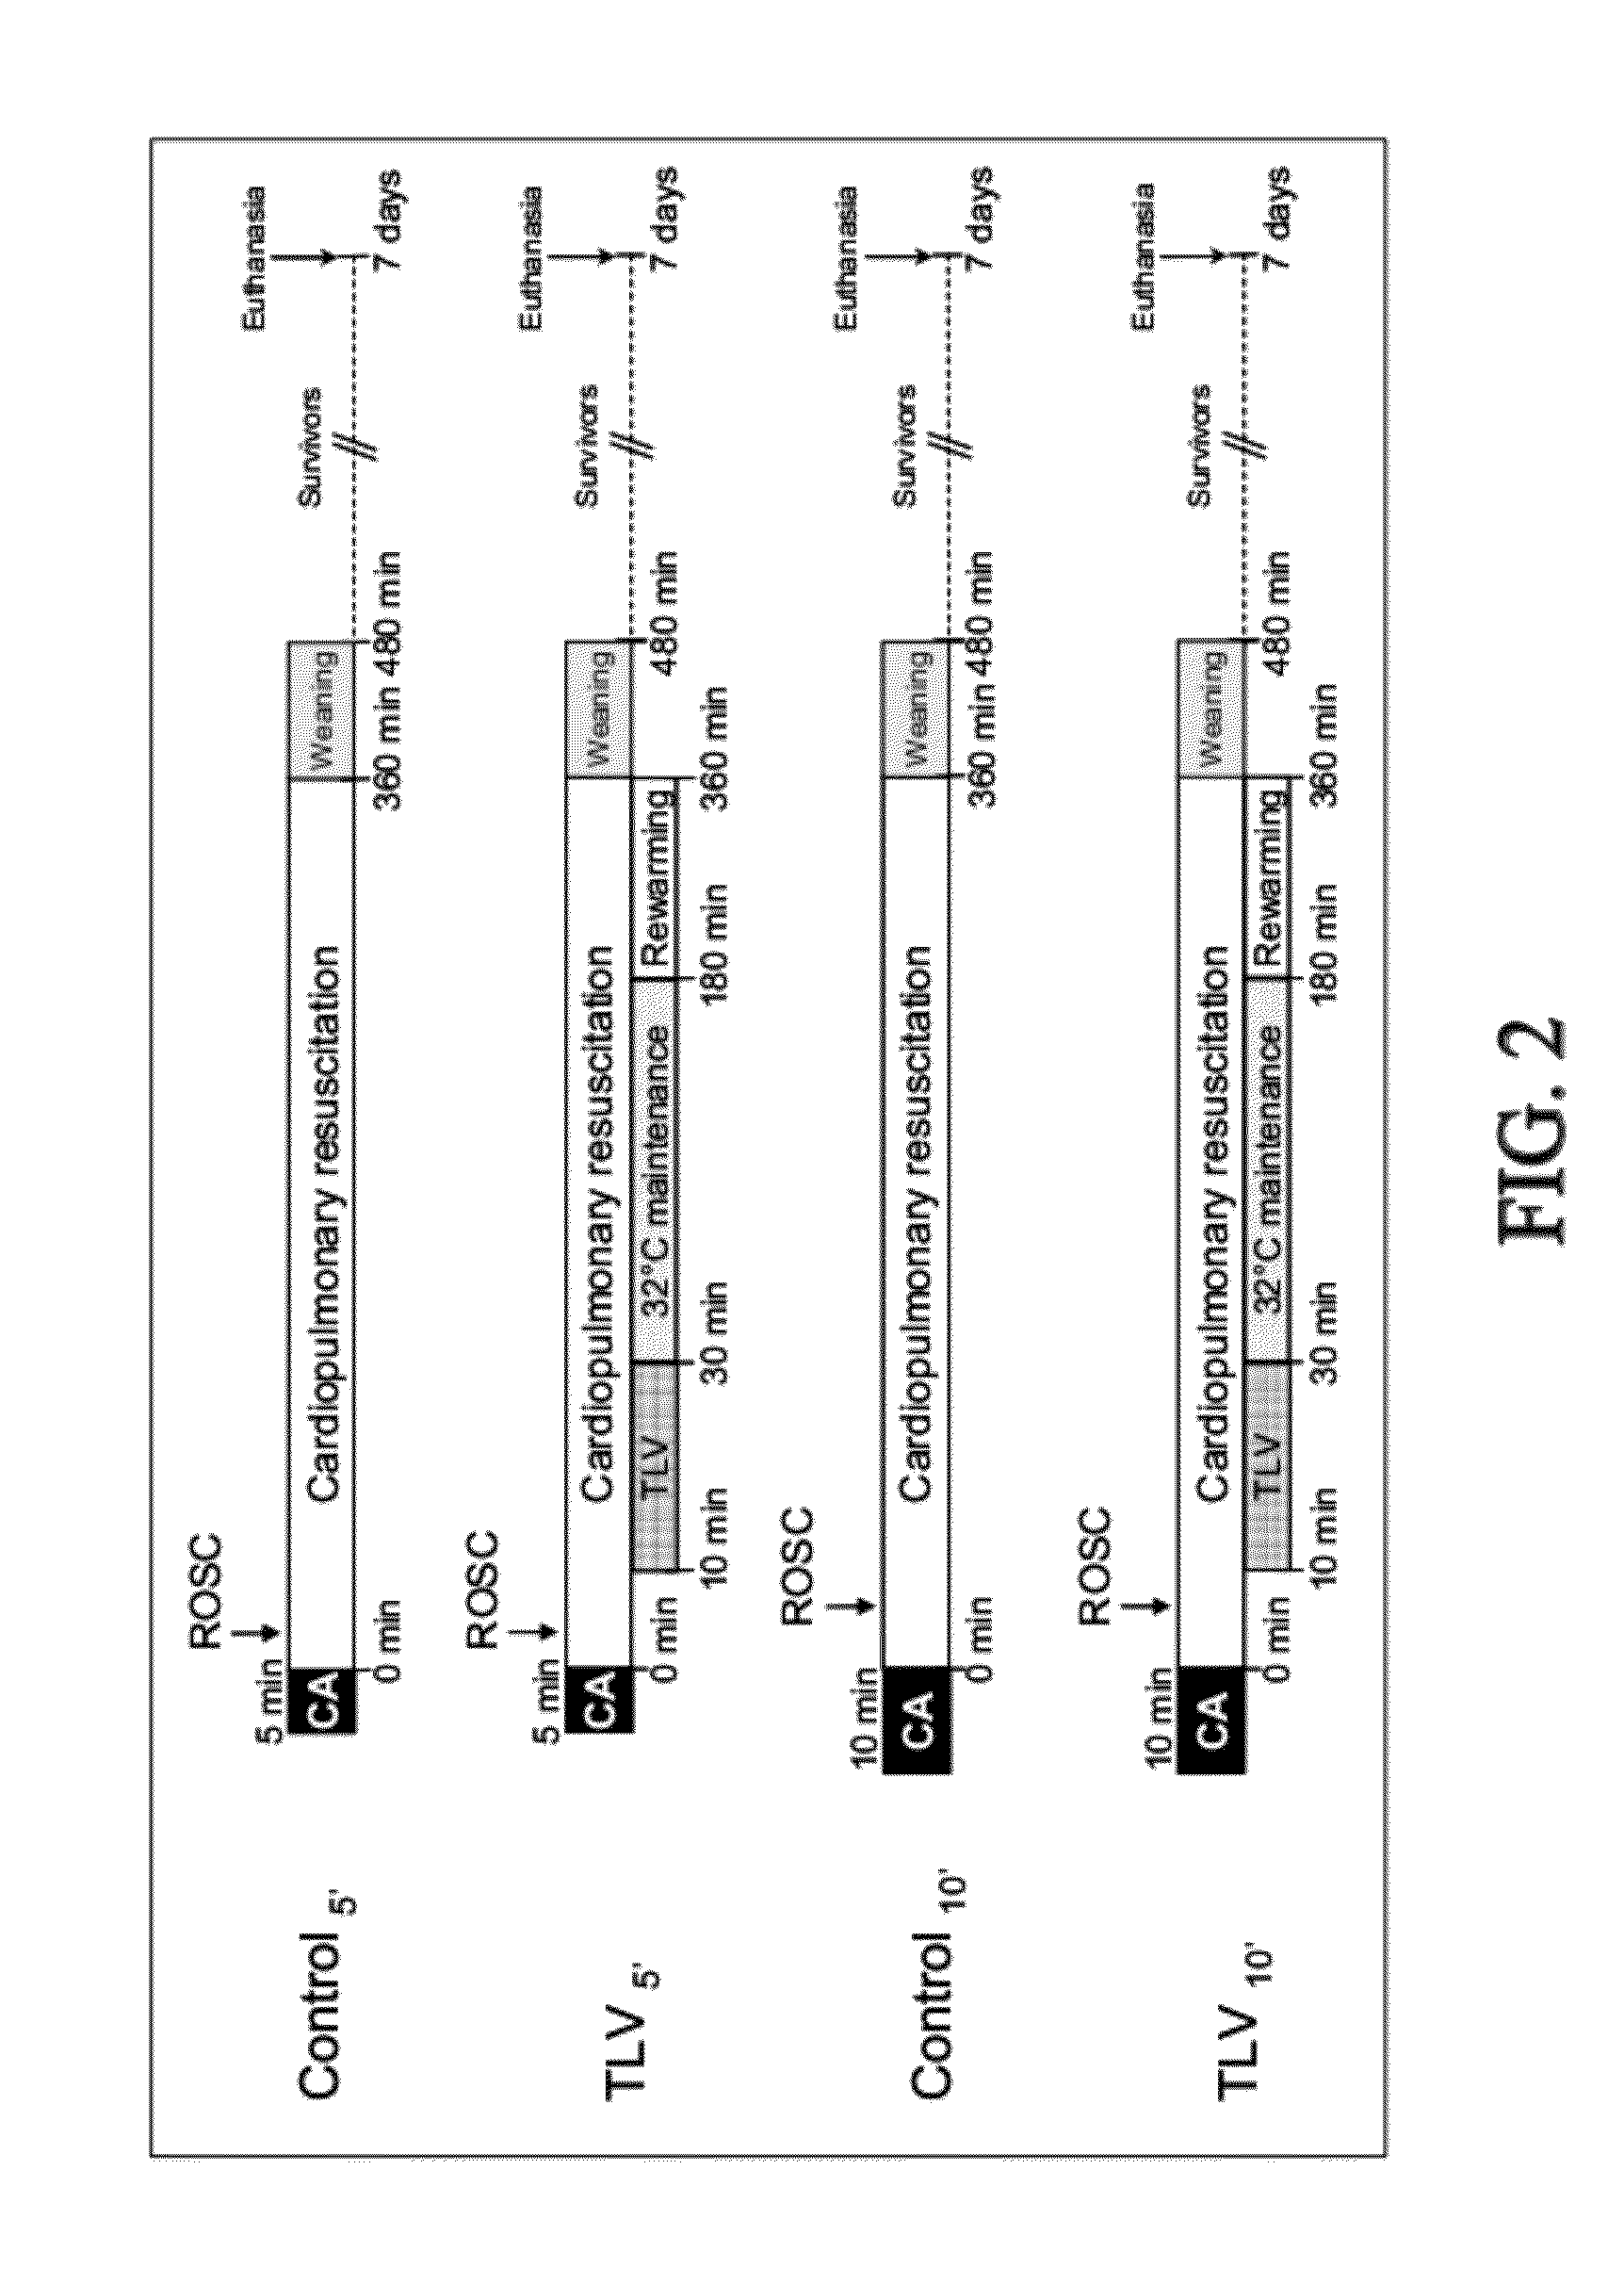 Method and System for Treatment of a Body of a Mammal in Cardiac Arrest